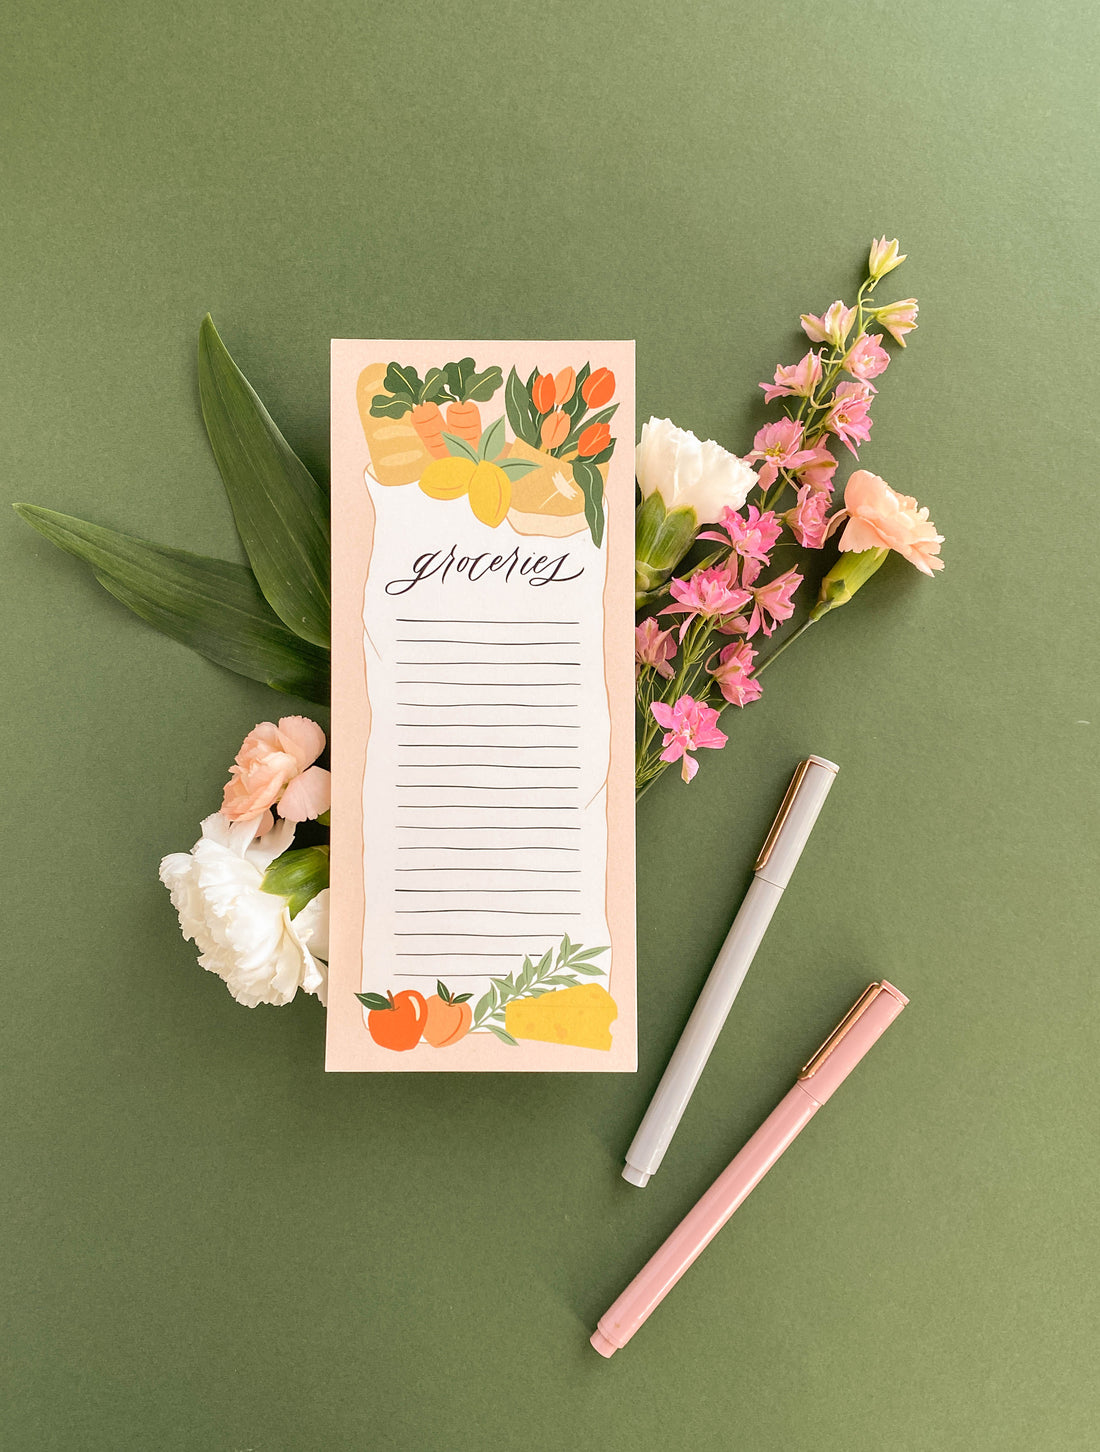 Grocery List Notepad